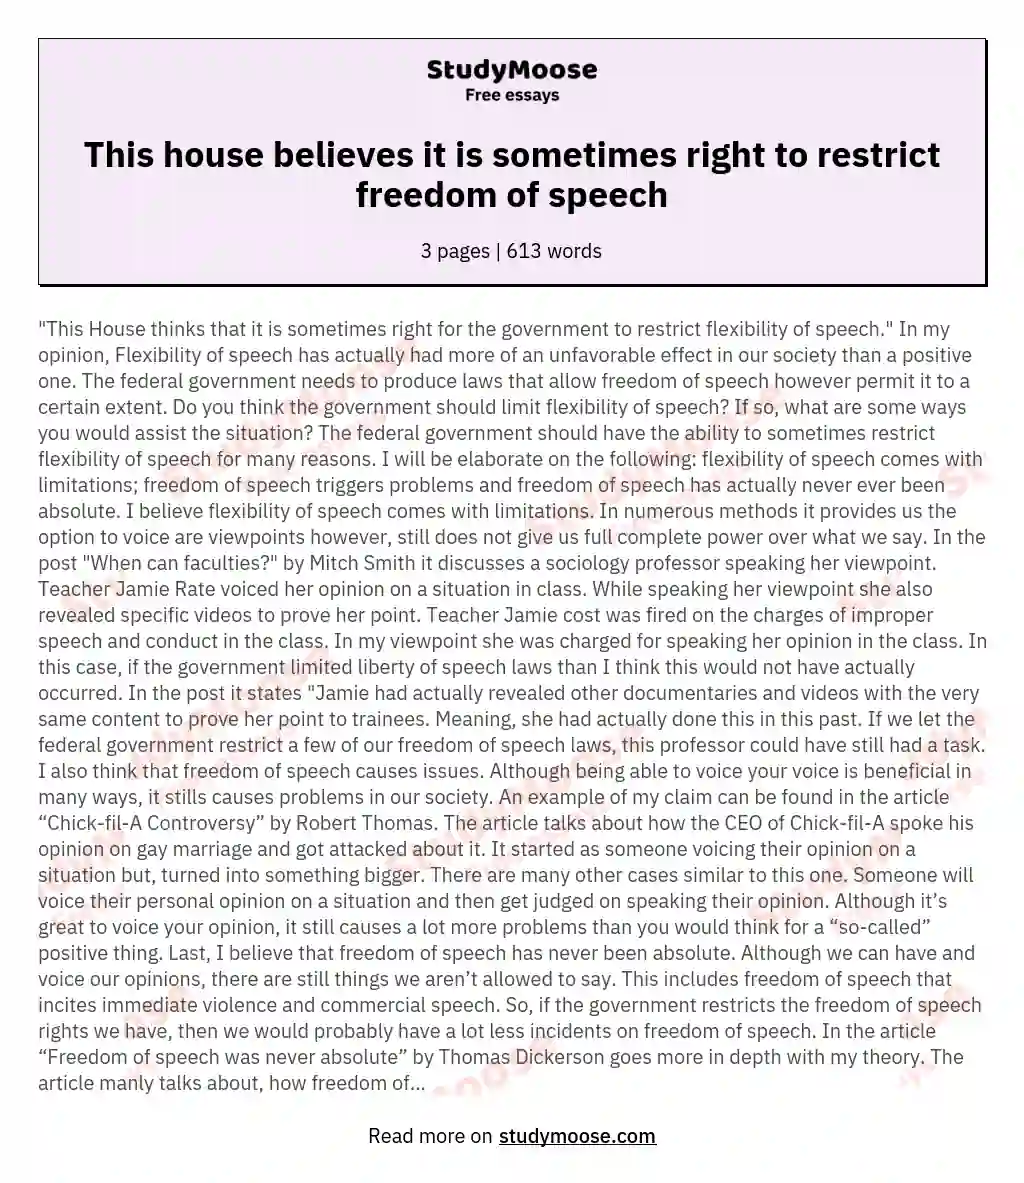 This house believes it is sometimes right to restrict freedom of speech essay